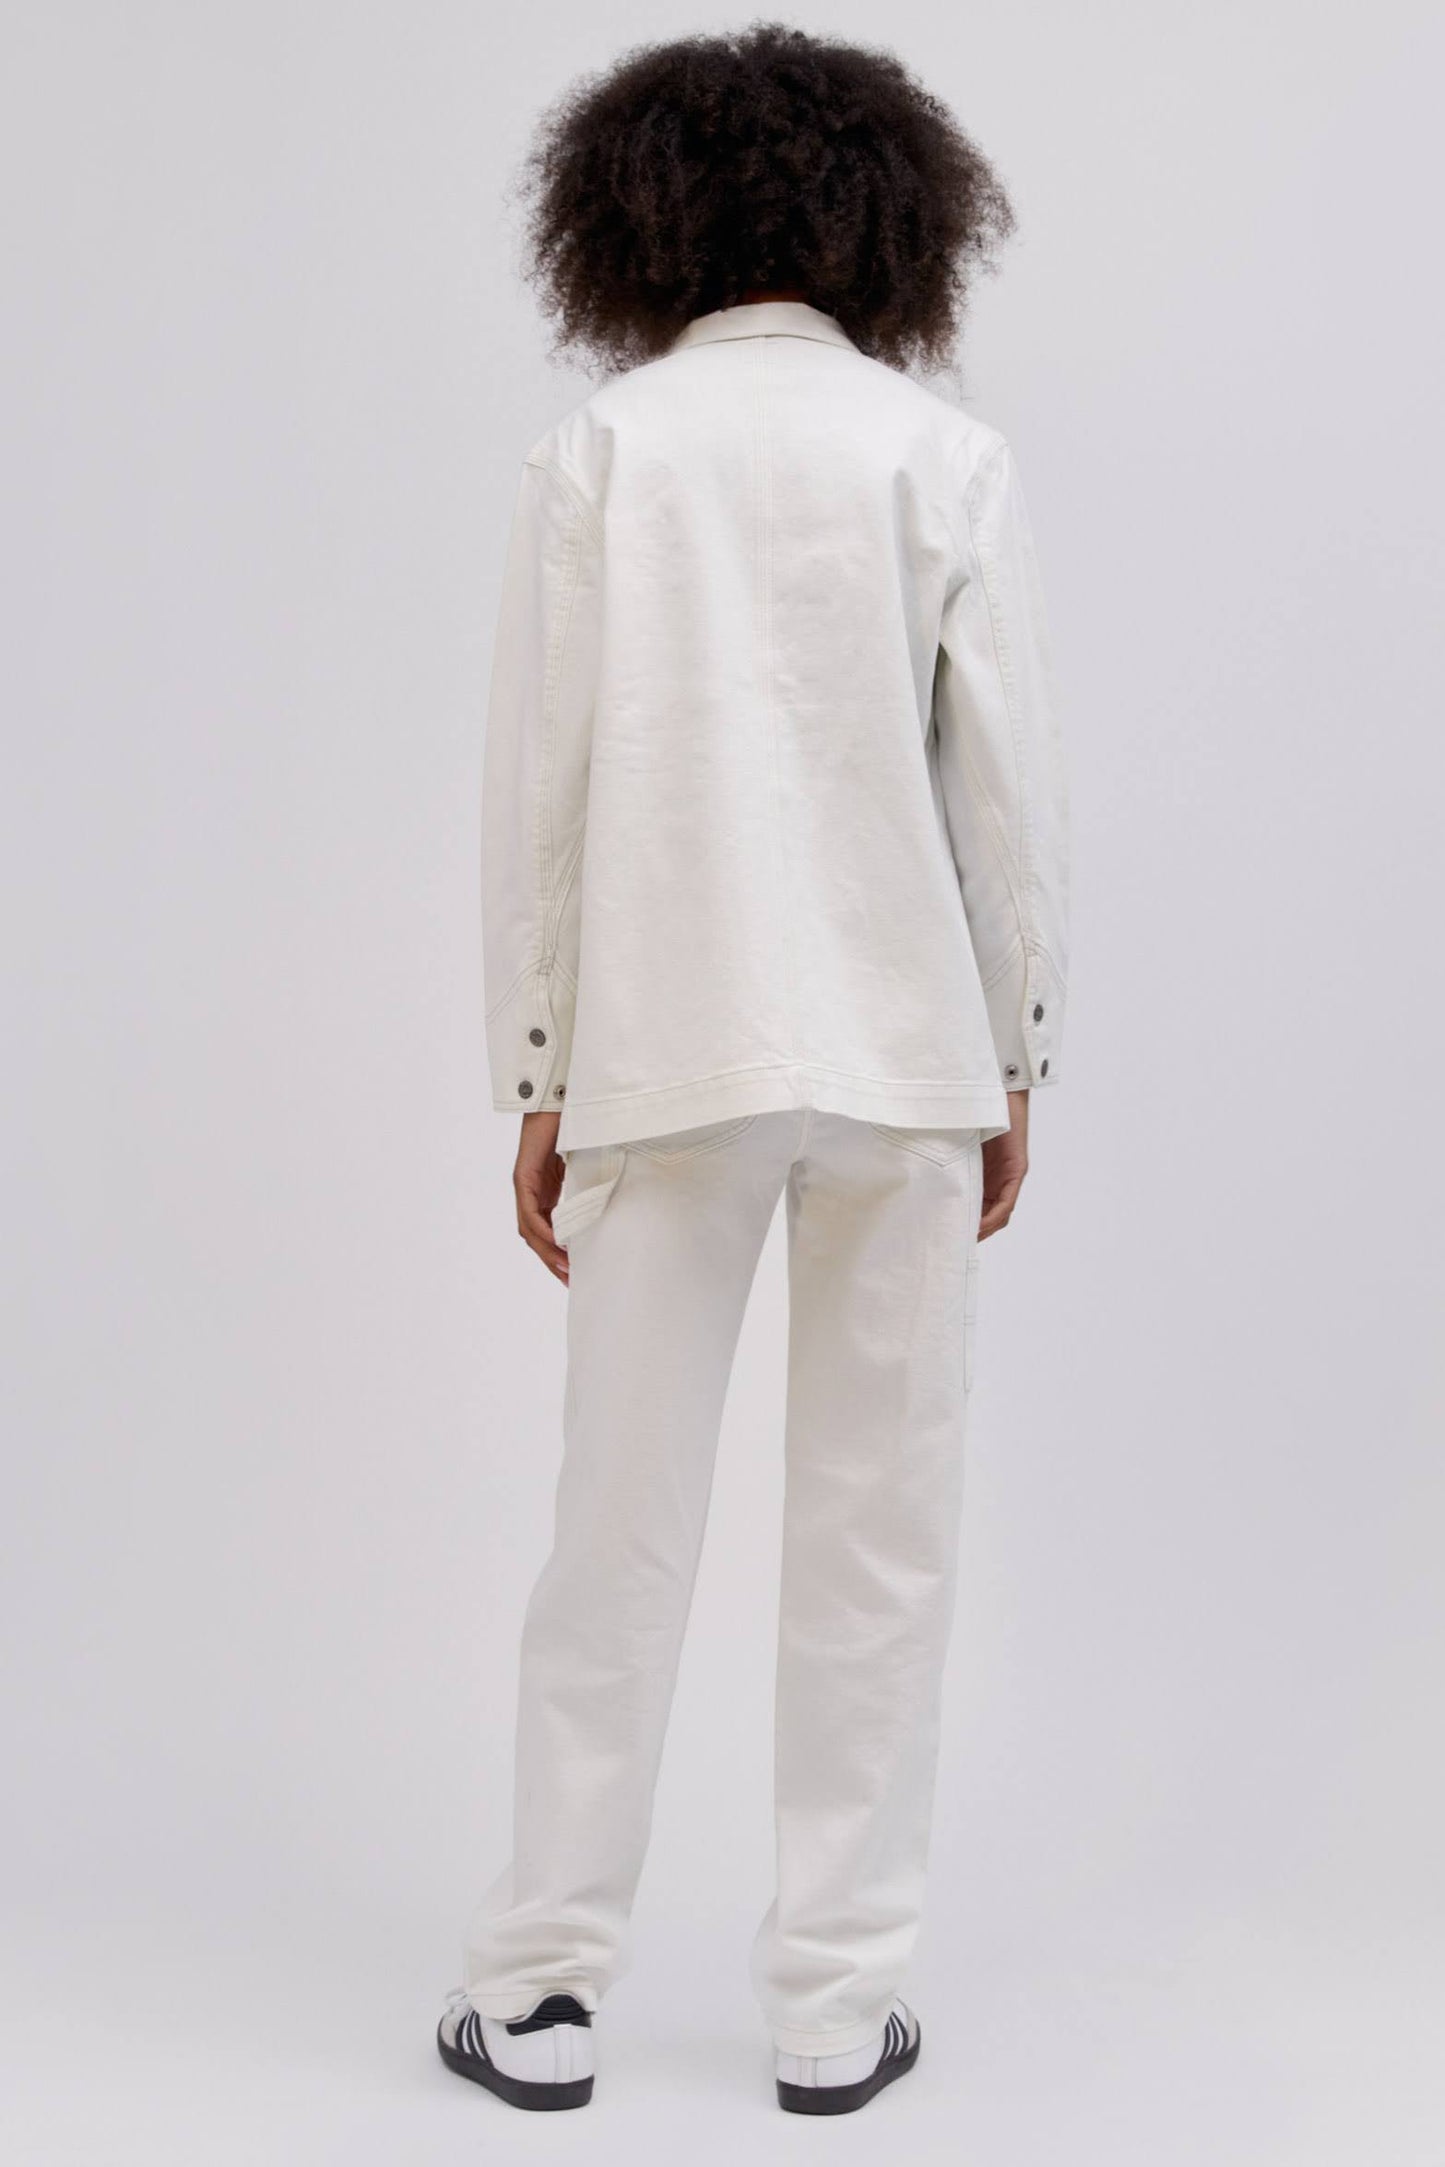 A curly-haired model featuring a white chore jacket designed with  triple-stitched hems and roomy pockets on an oversized fit.